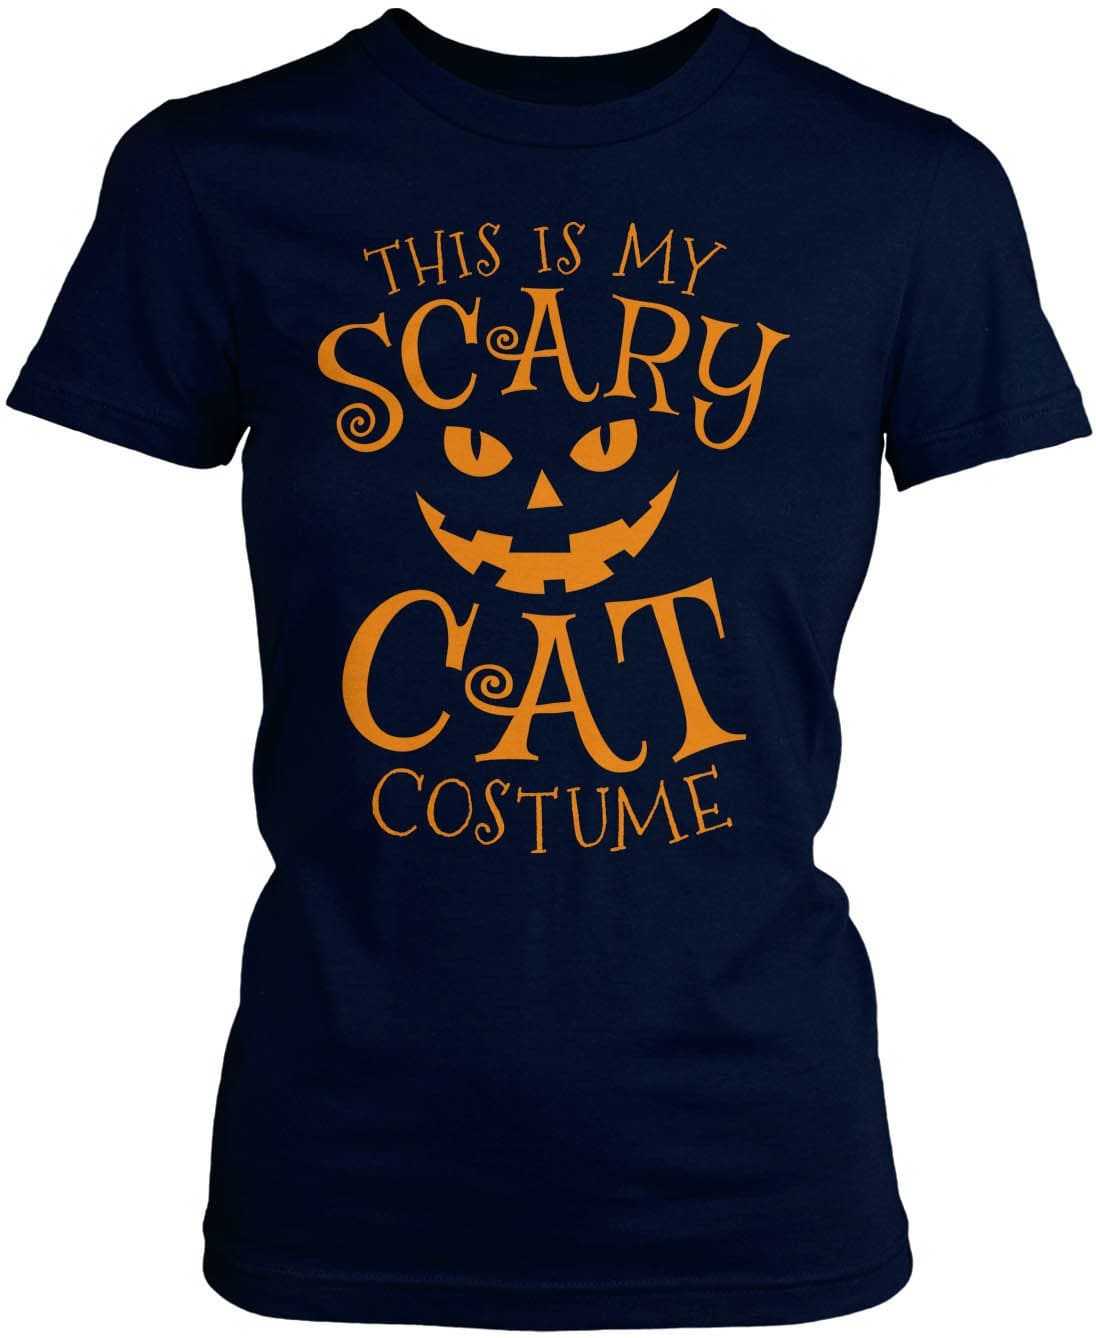 This Is My Scary Cat Costume - T-Shirt / Hoodie